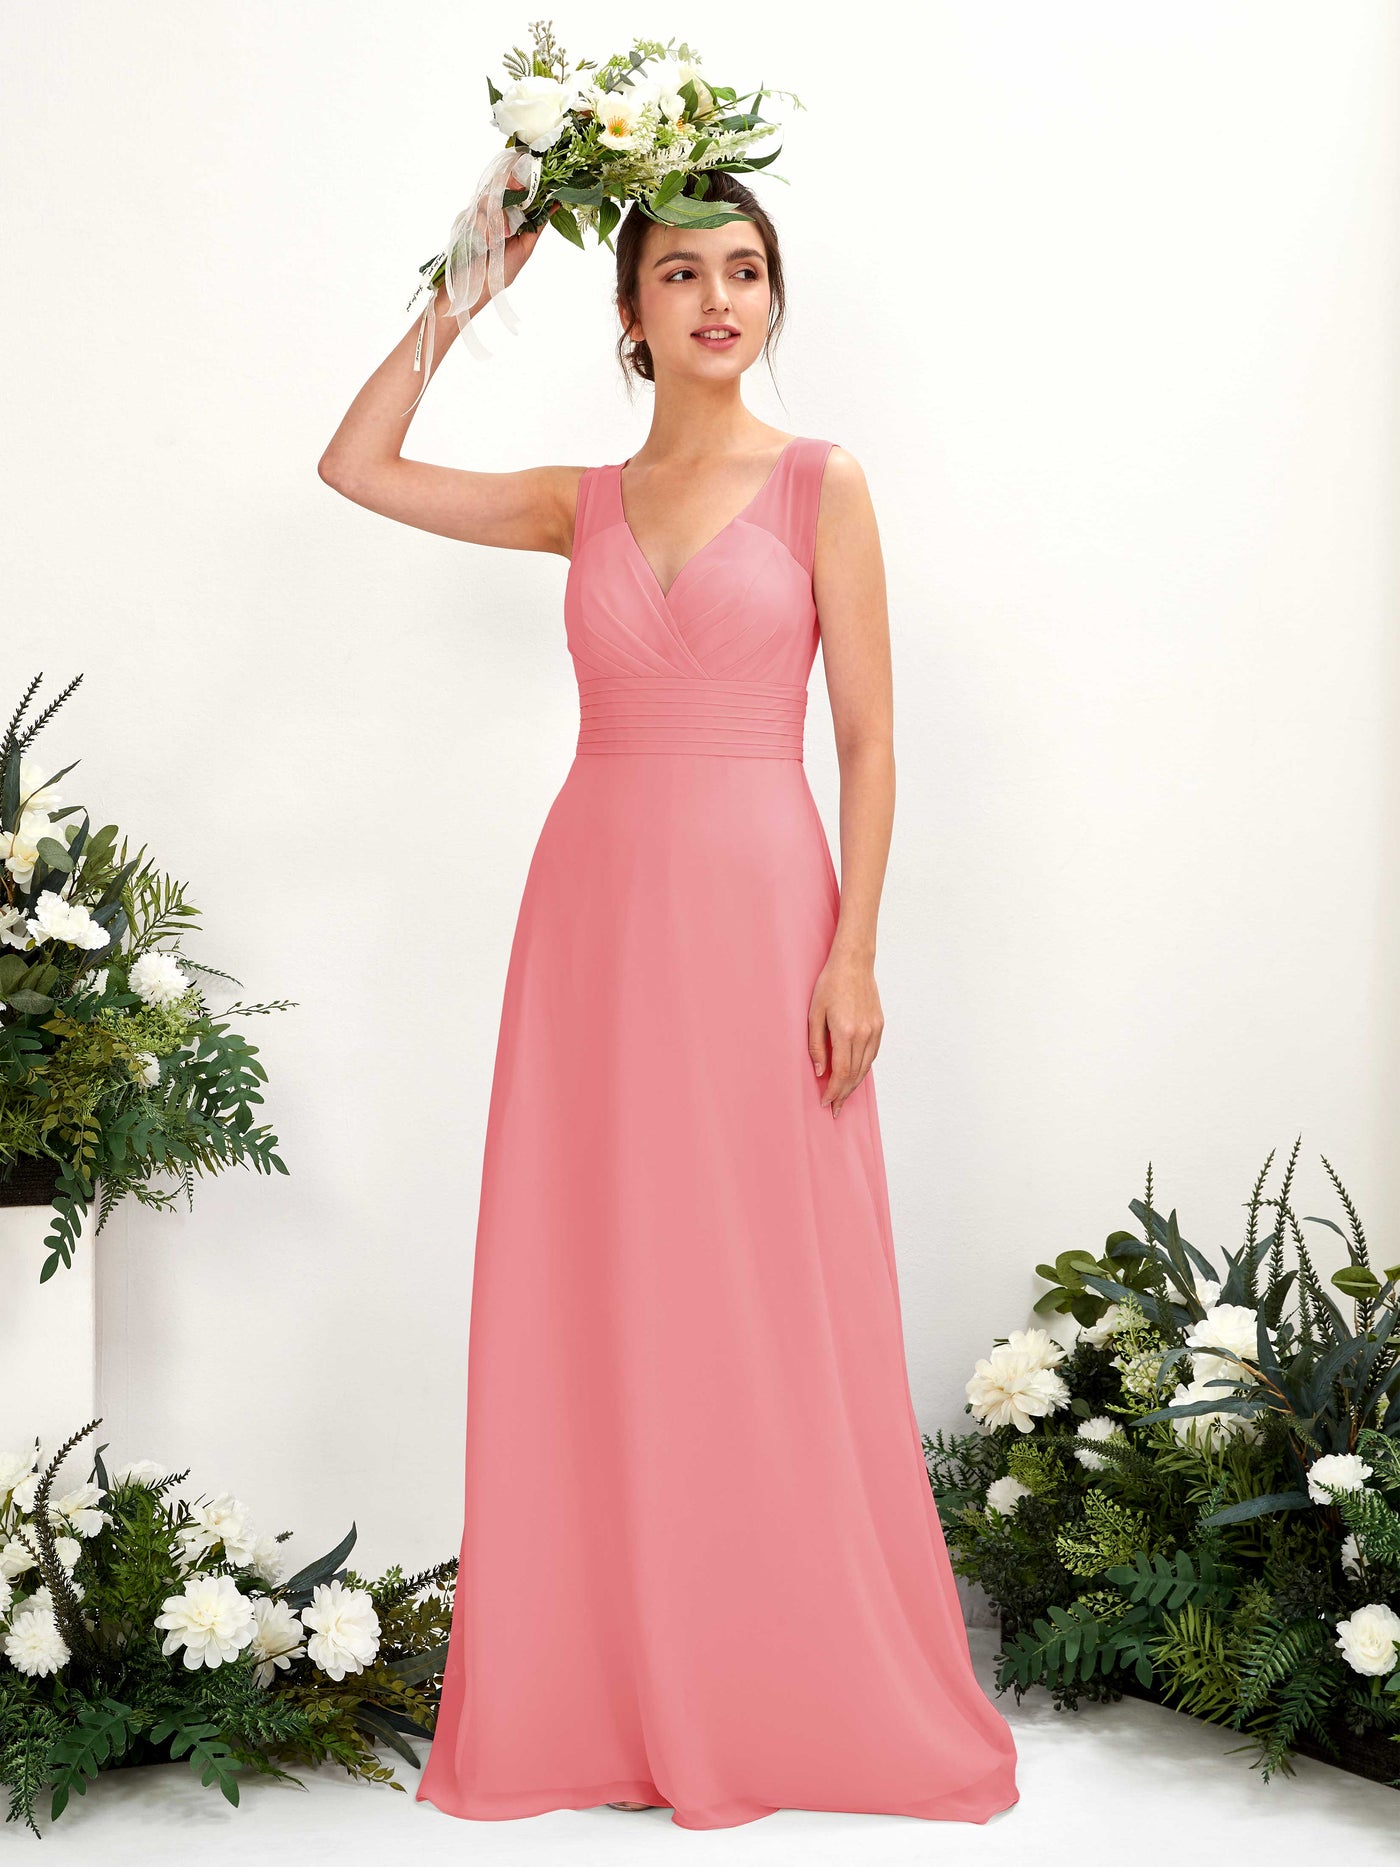 Coral Pink Bridesmaid Dresses Bridesmaid Dress A-line Chiffon Straps Full Length Sleeveless Wedding Party Dress (81220930)#color_coral-pink